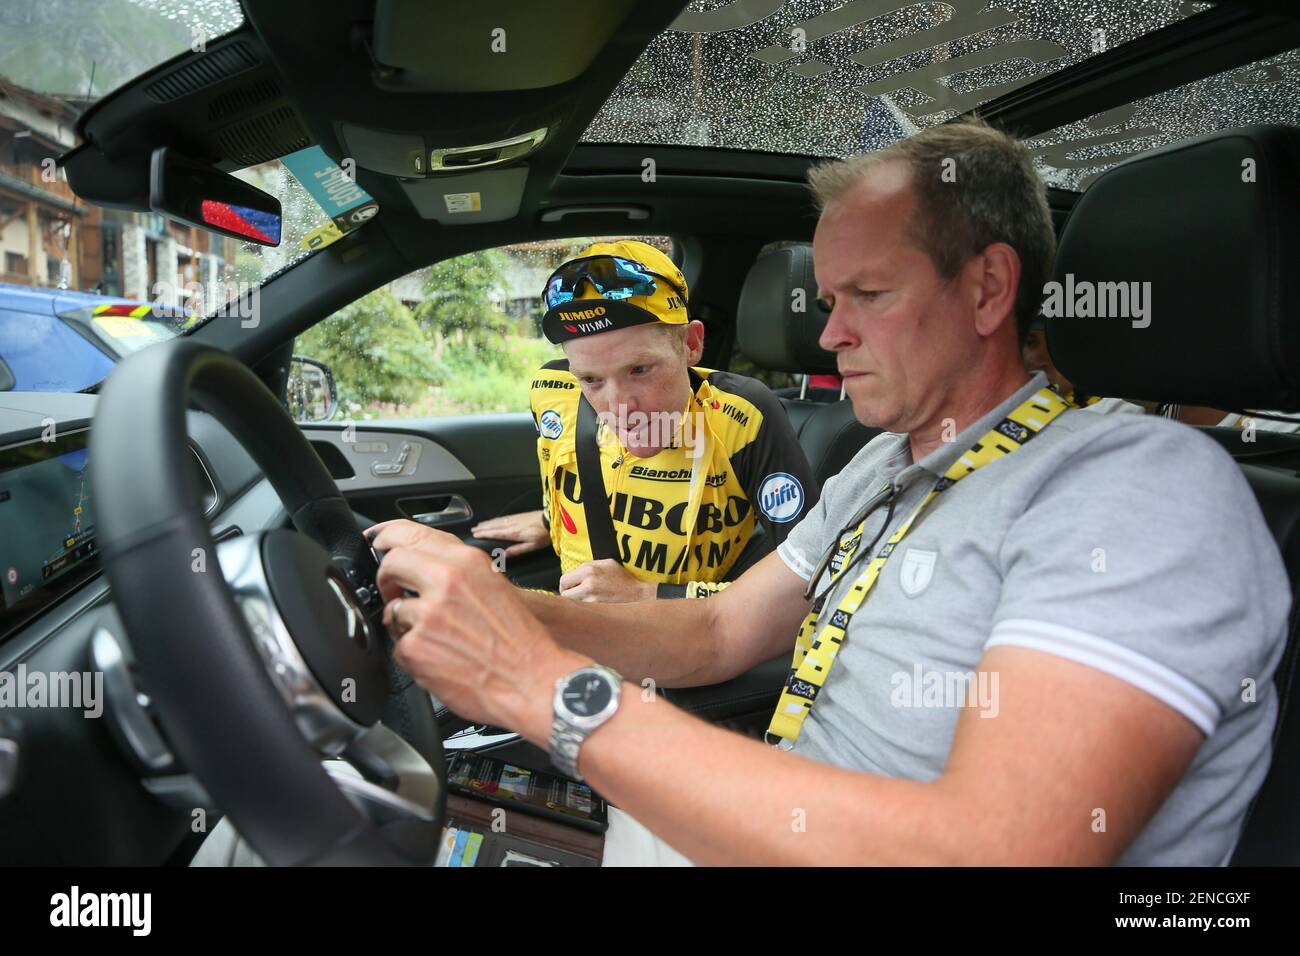 Tignes - 26-07-2019, cycling, Stage 19, etappe 19, Saint Jean de Maurienne  - Tignes, 19e stage to Tignes cancelled due to bad weather conditions.  Steven Kruiswijk sits dry in the team car